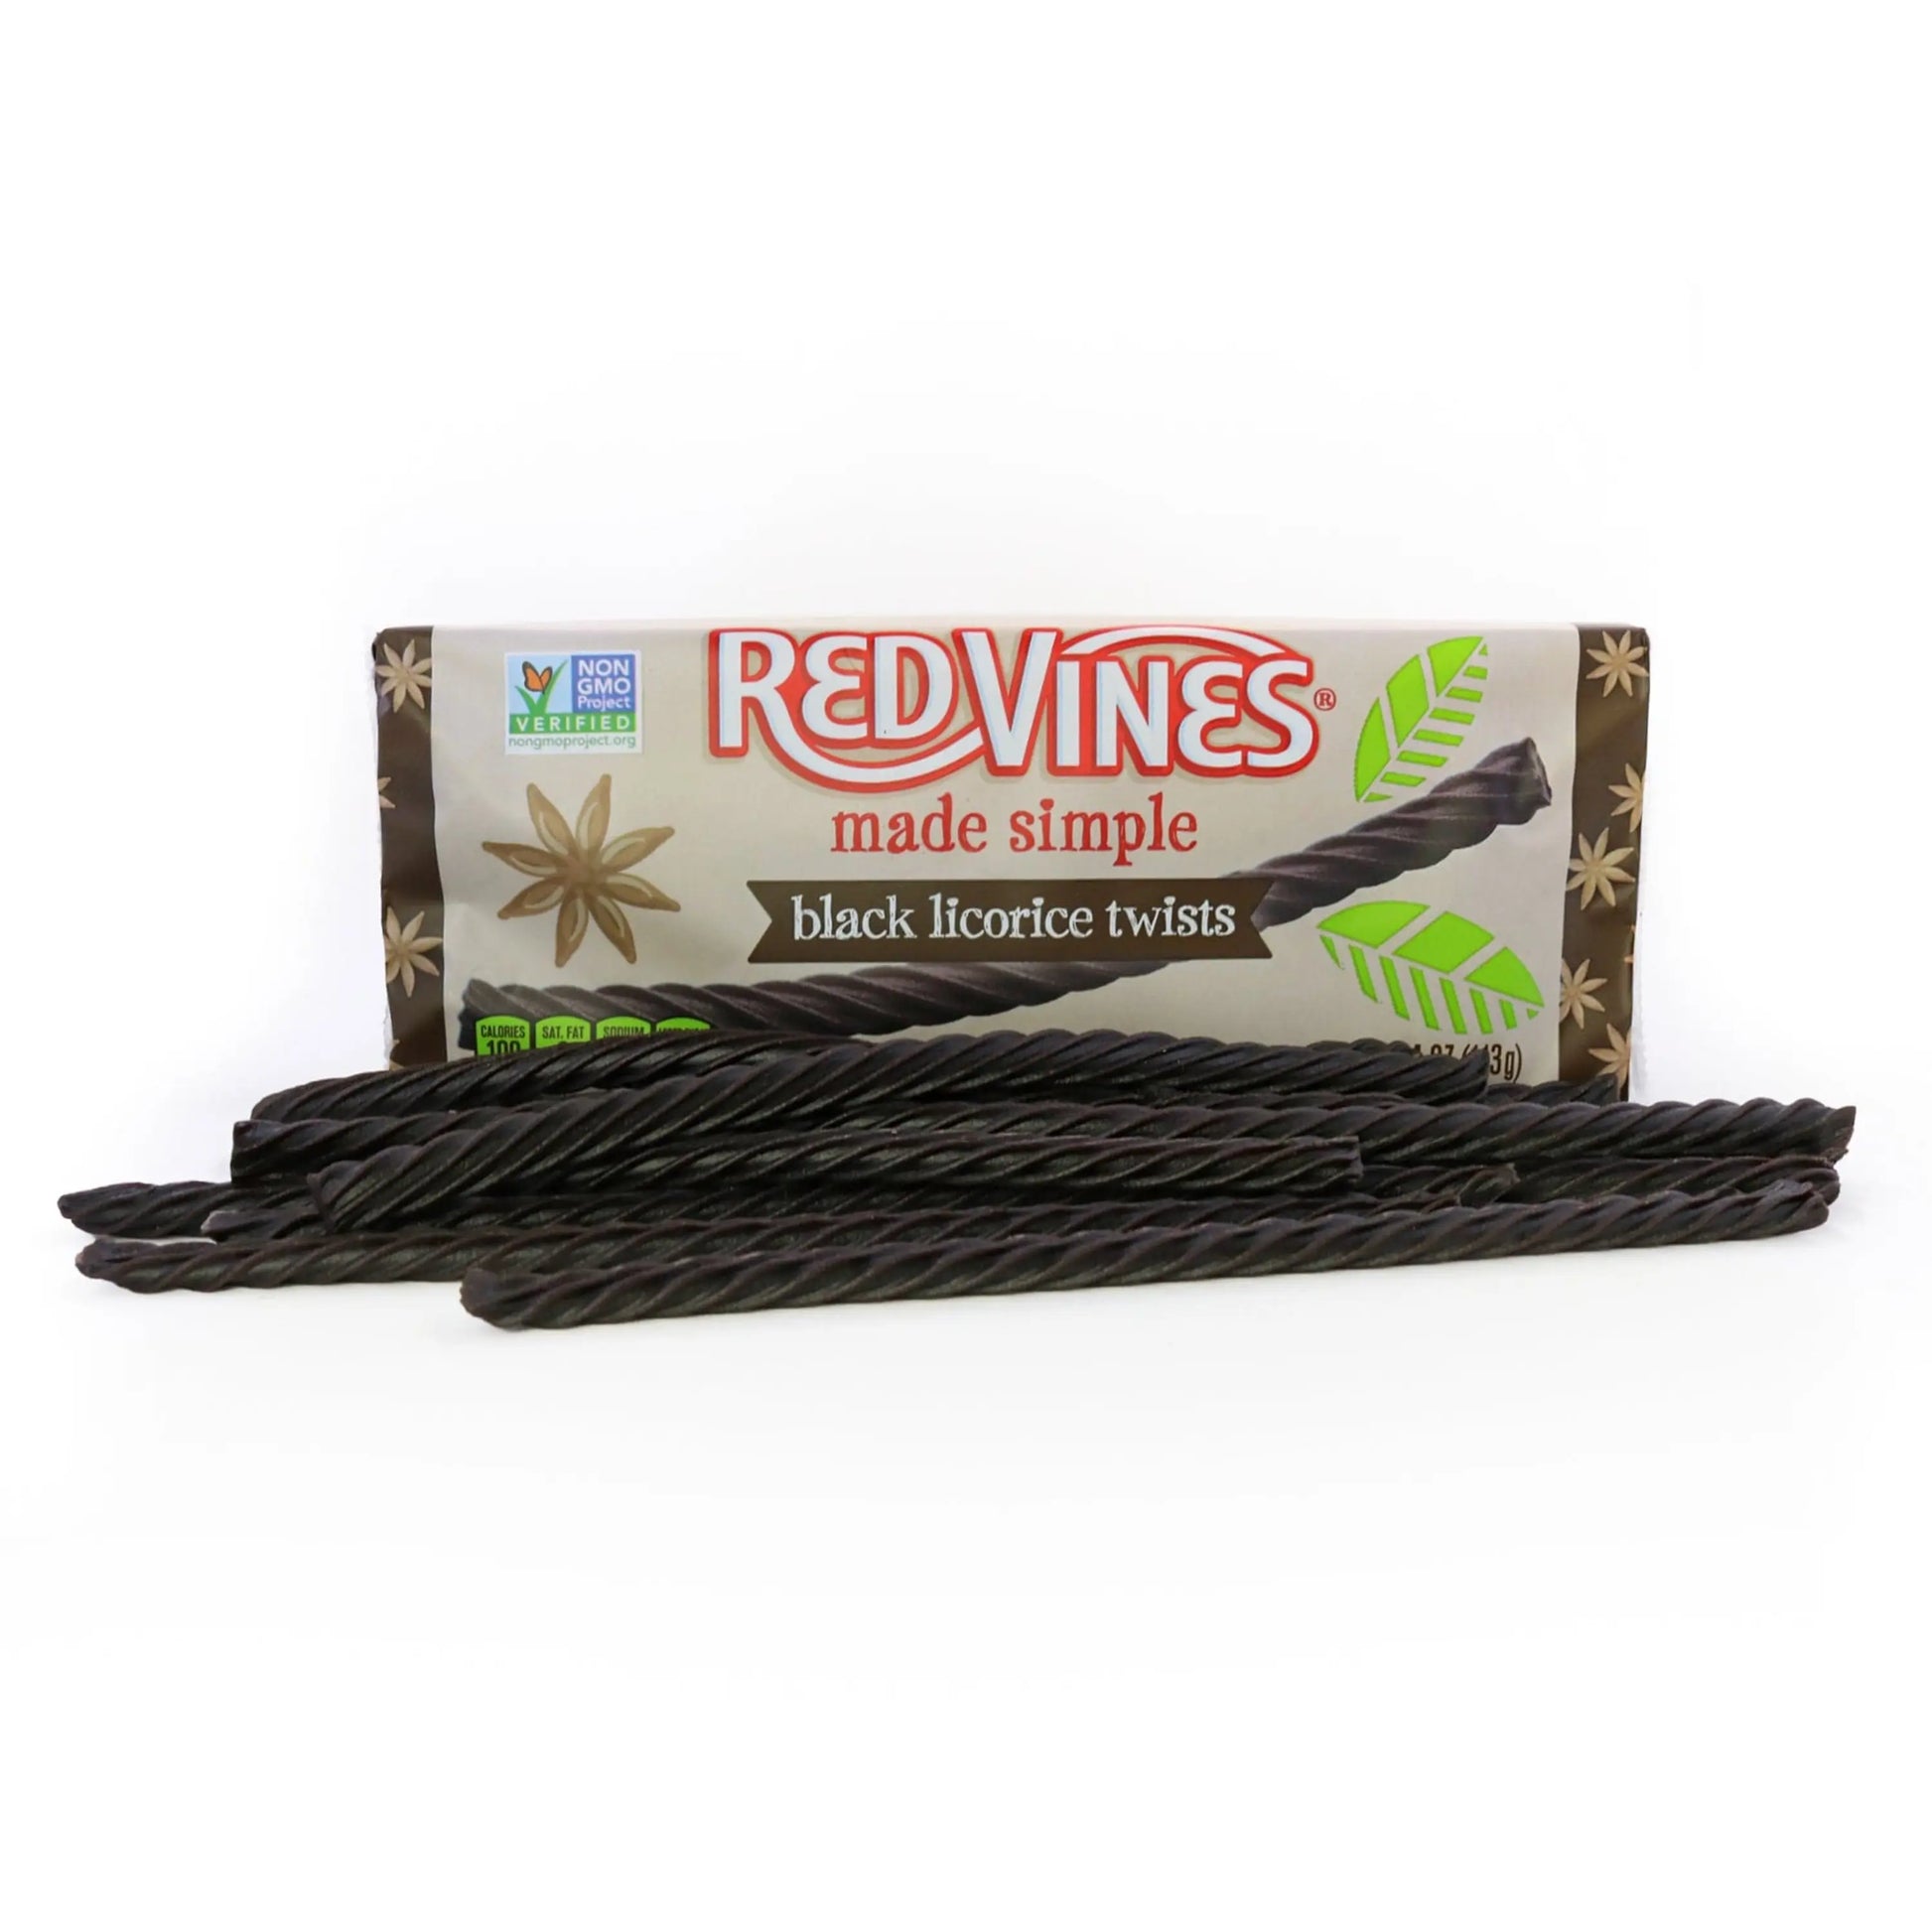 RED VINES Made Simple Black Licorice Twists 4oz Tray with candy twists in front